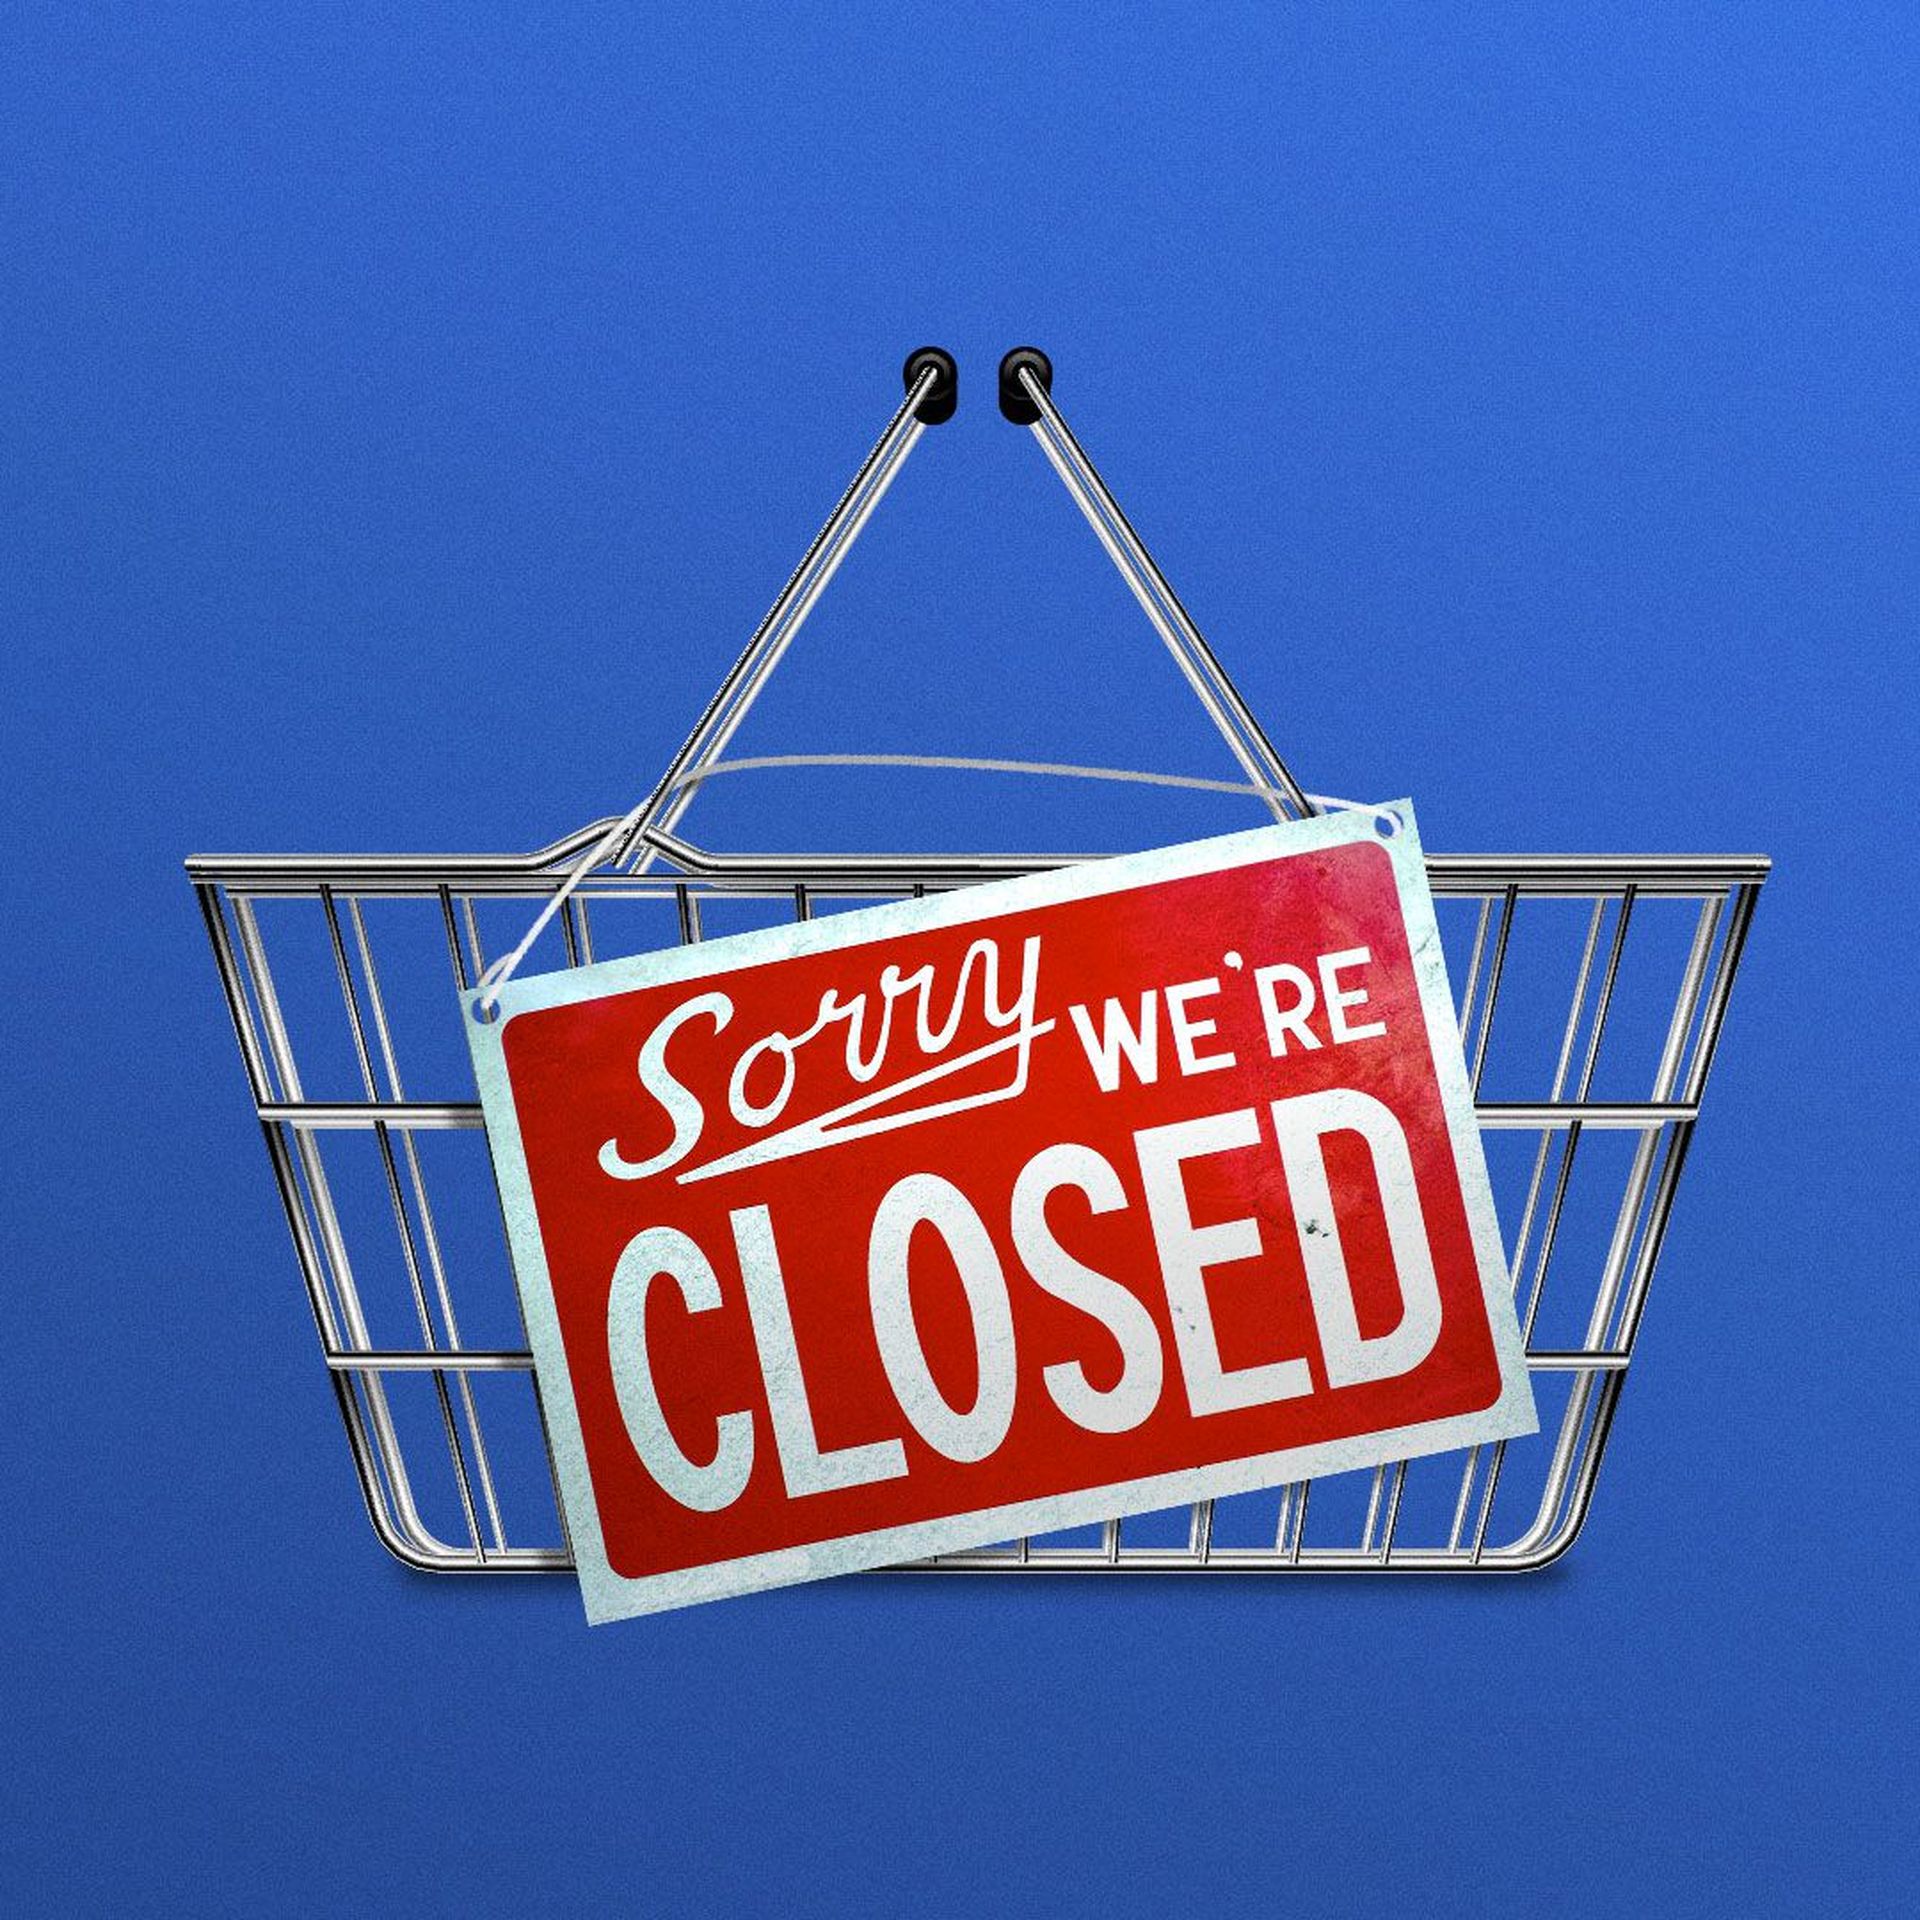 Illustration of hand-held shopping cart with “Sorry We’re Closed” sign